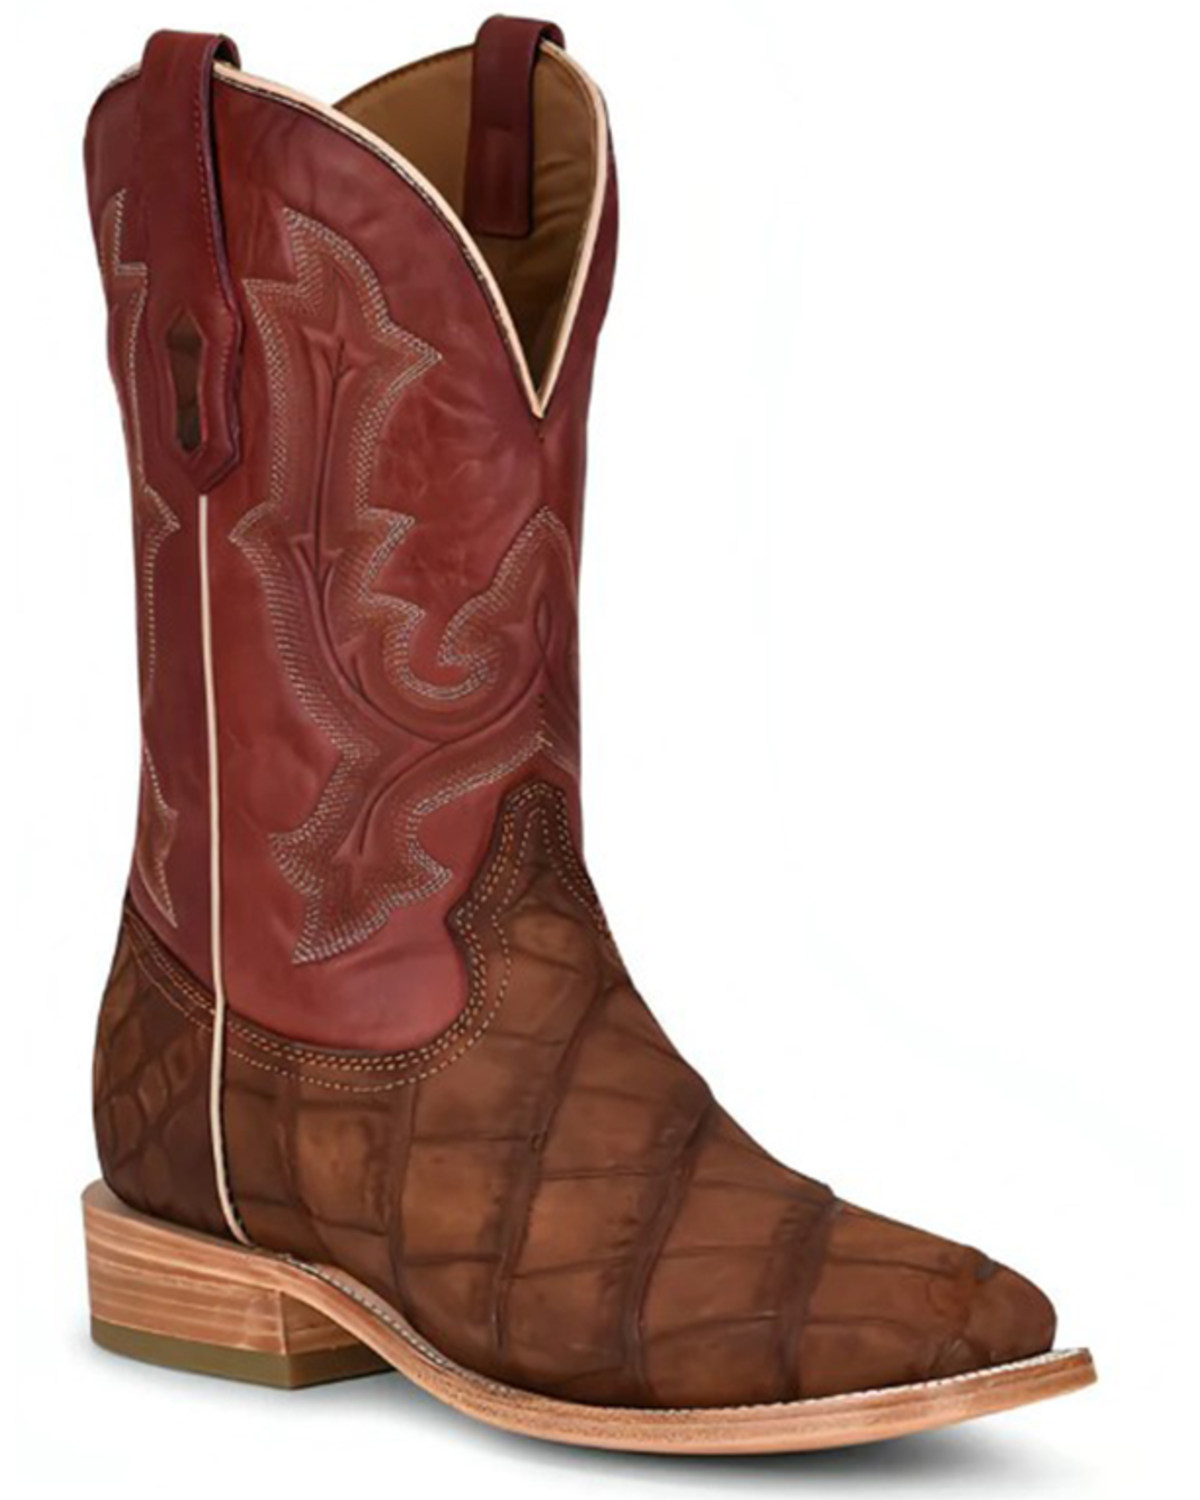 Corral Men's Exotic Alligator Embroidered Western Boots - Broad Square Toe